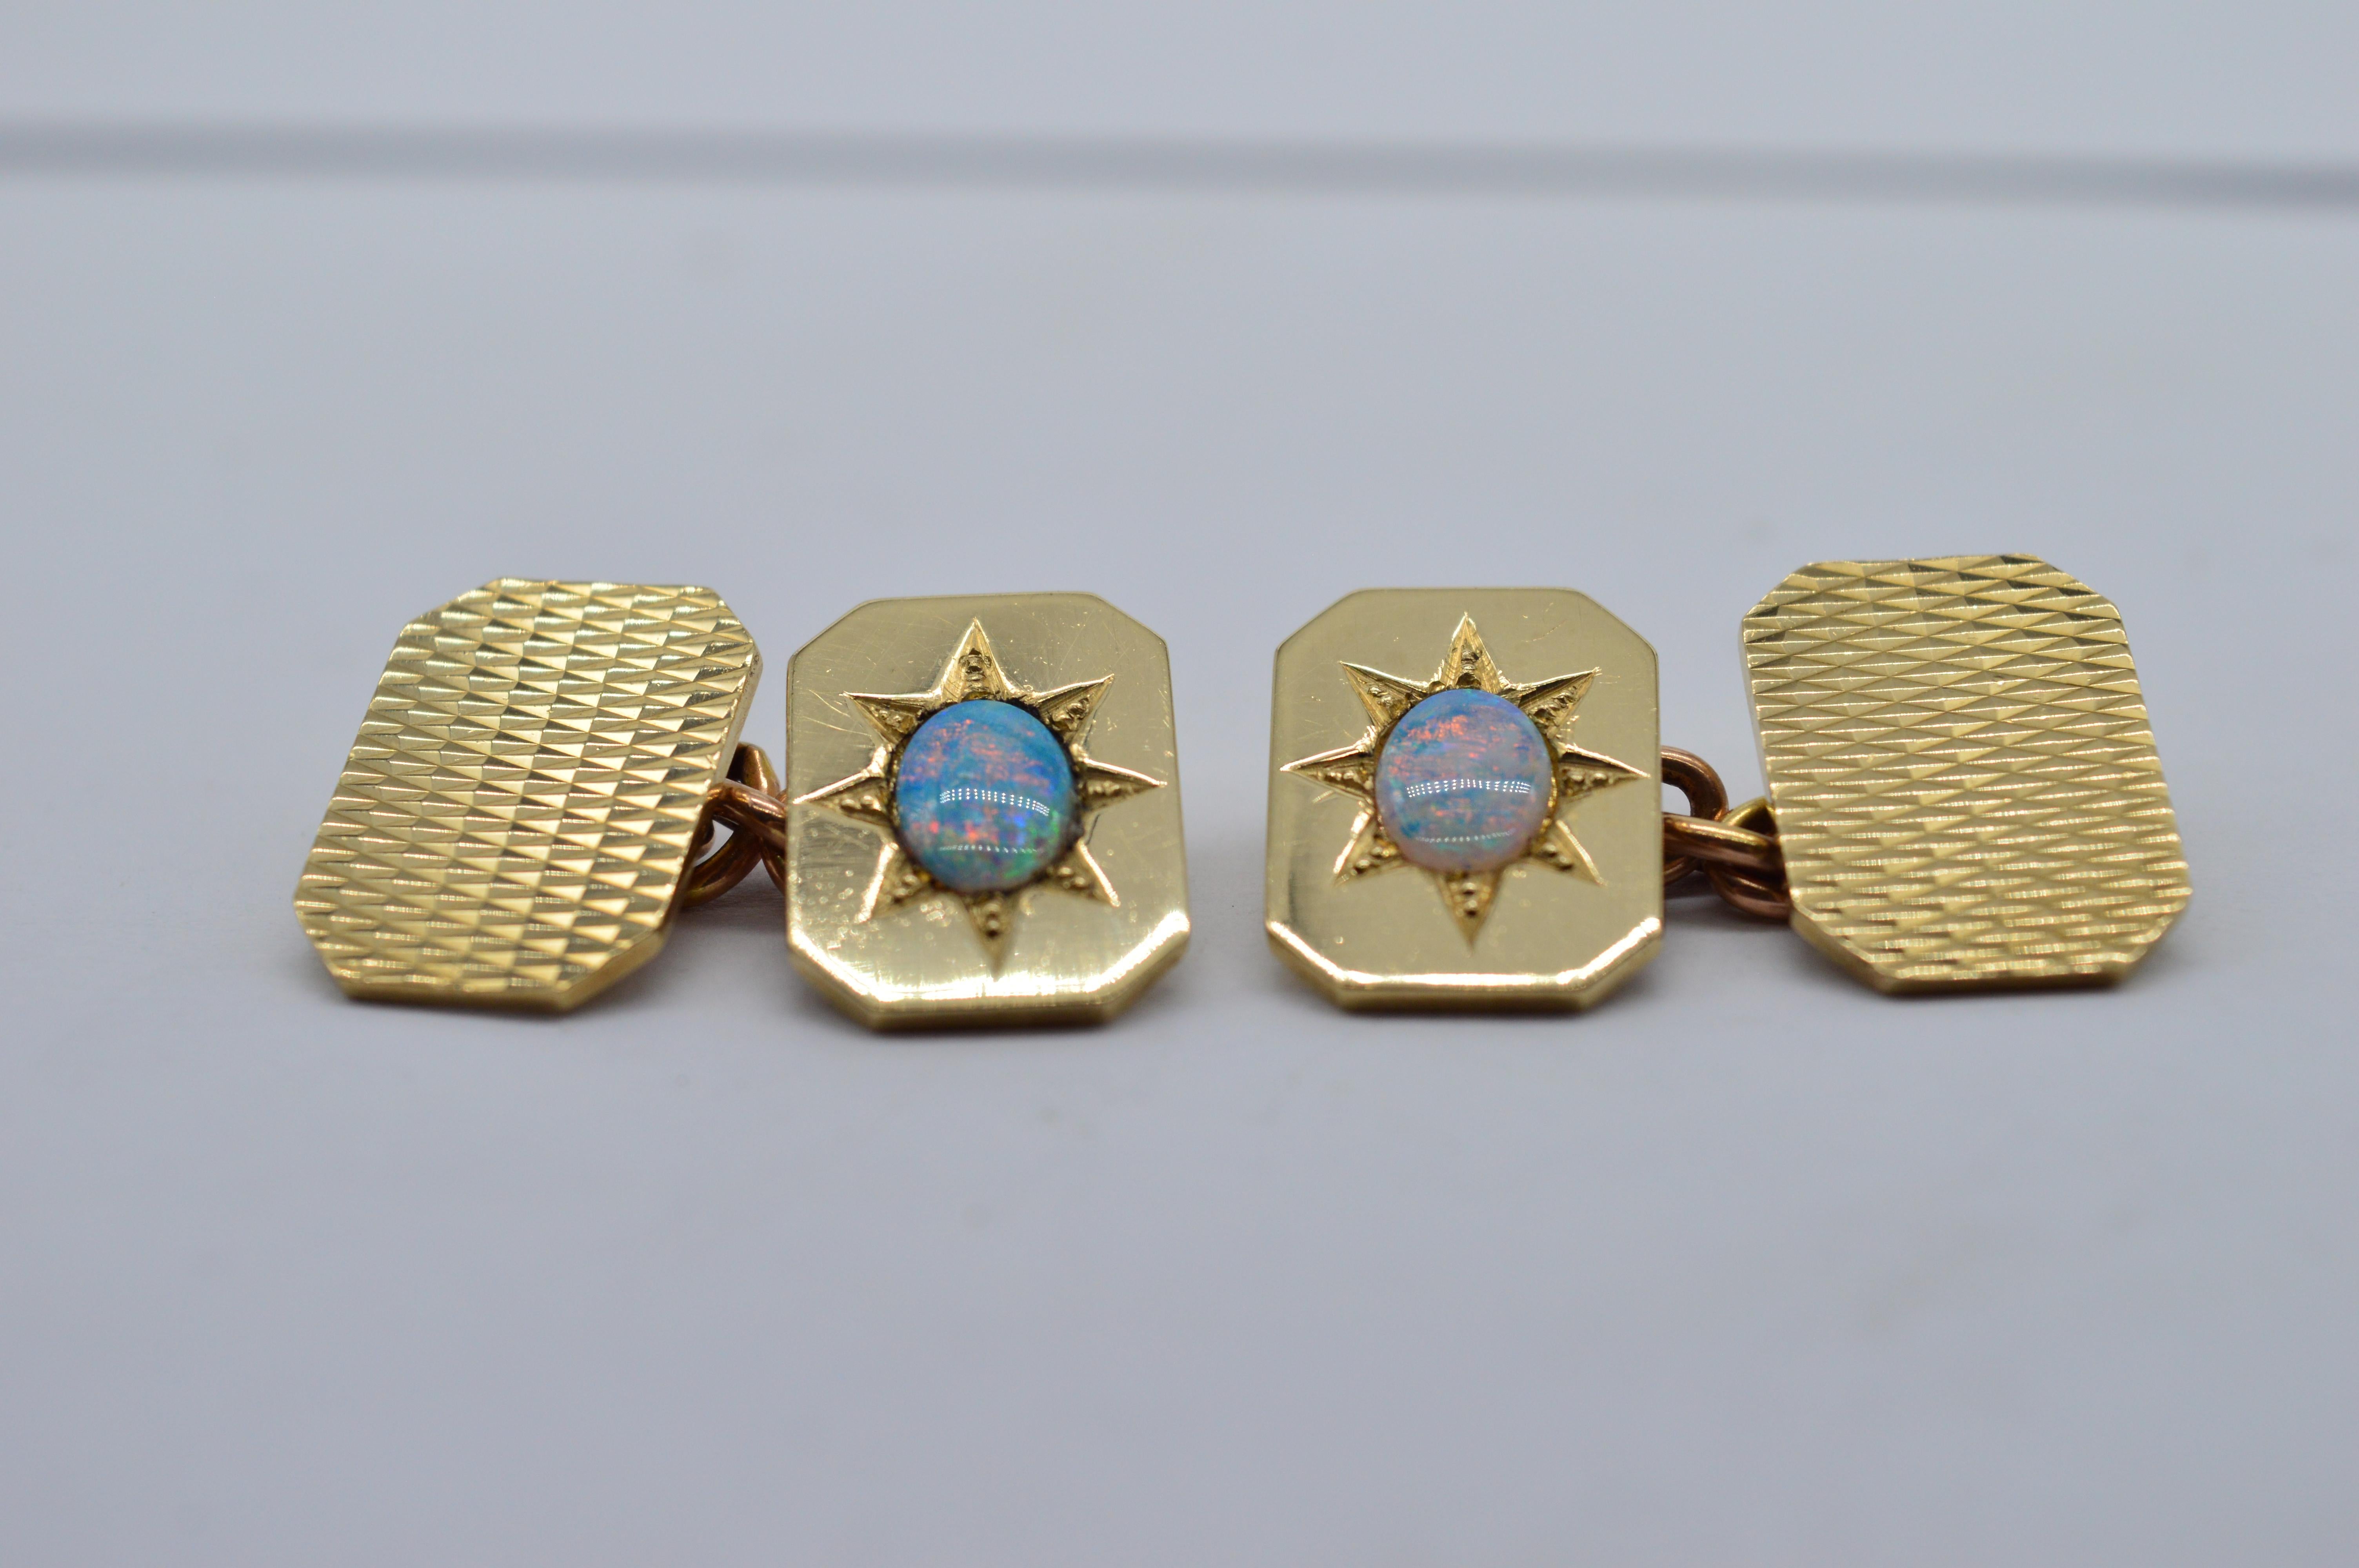 A set of hand crafted 9ct gold Opal doublet cufflinks with diamond cut engraving

Reminiscent of the brutalist styling, these hand crafted cufflinks feature perfectly matched opal Doublets of incredible quality

9.35g

We have sold to the set of Hit